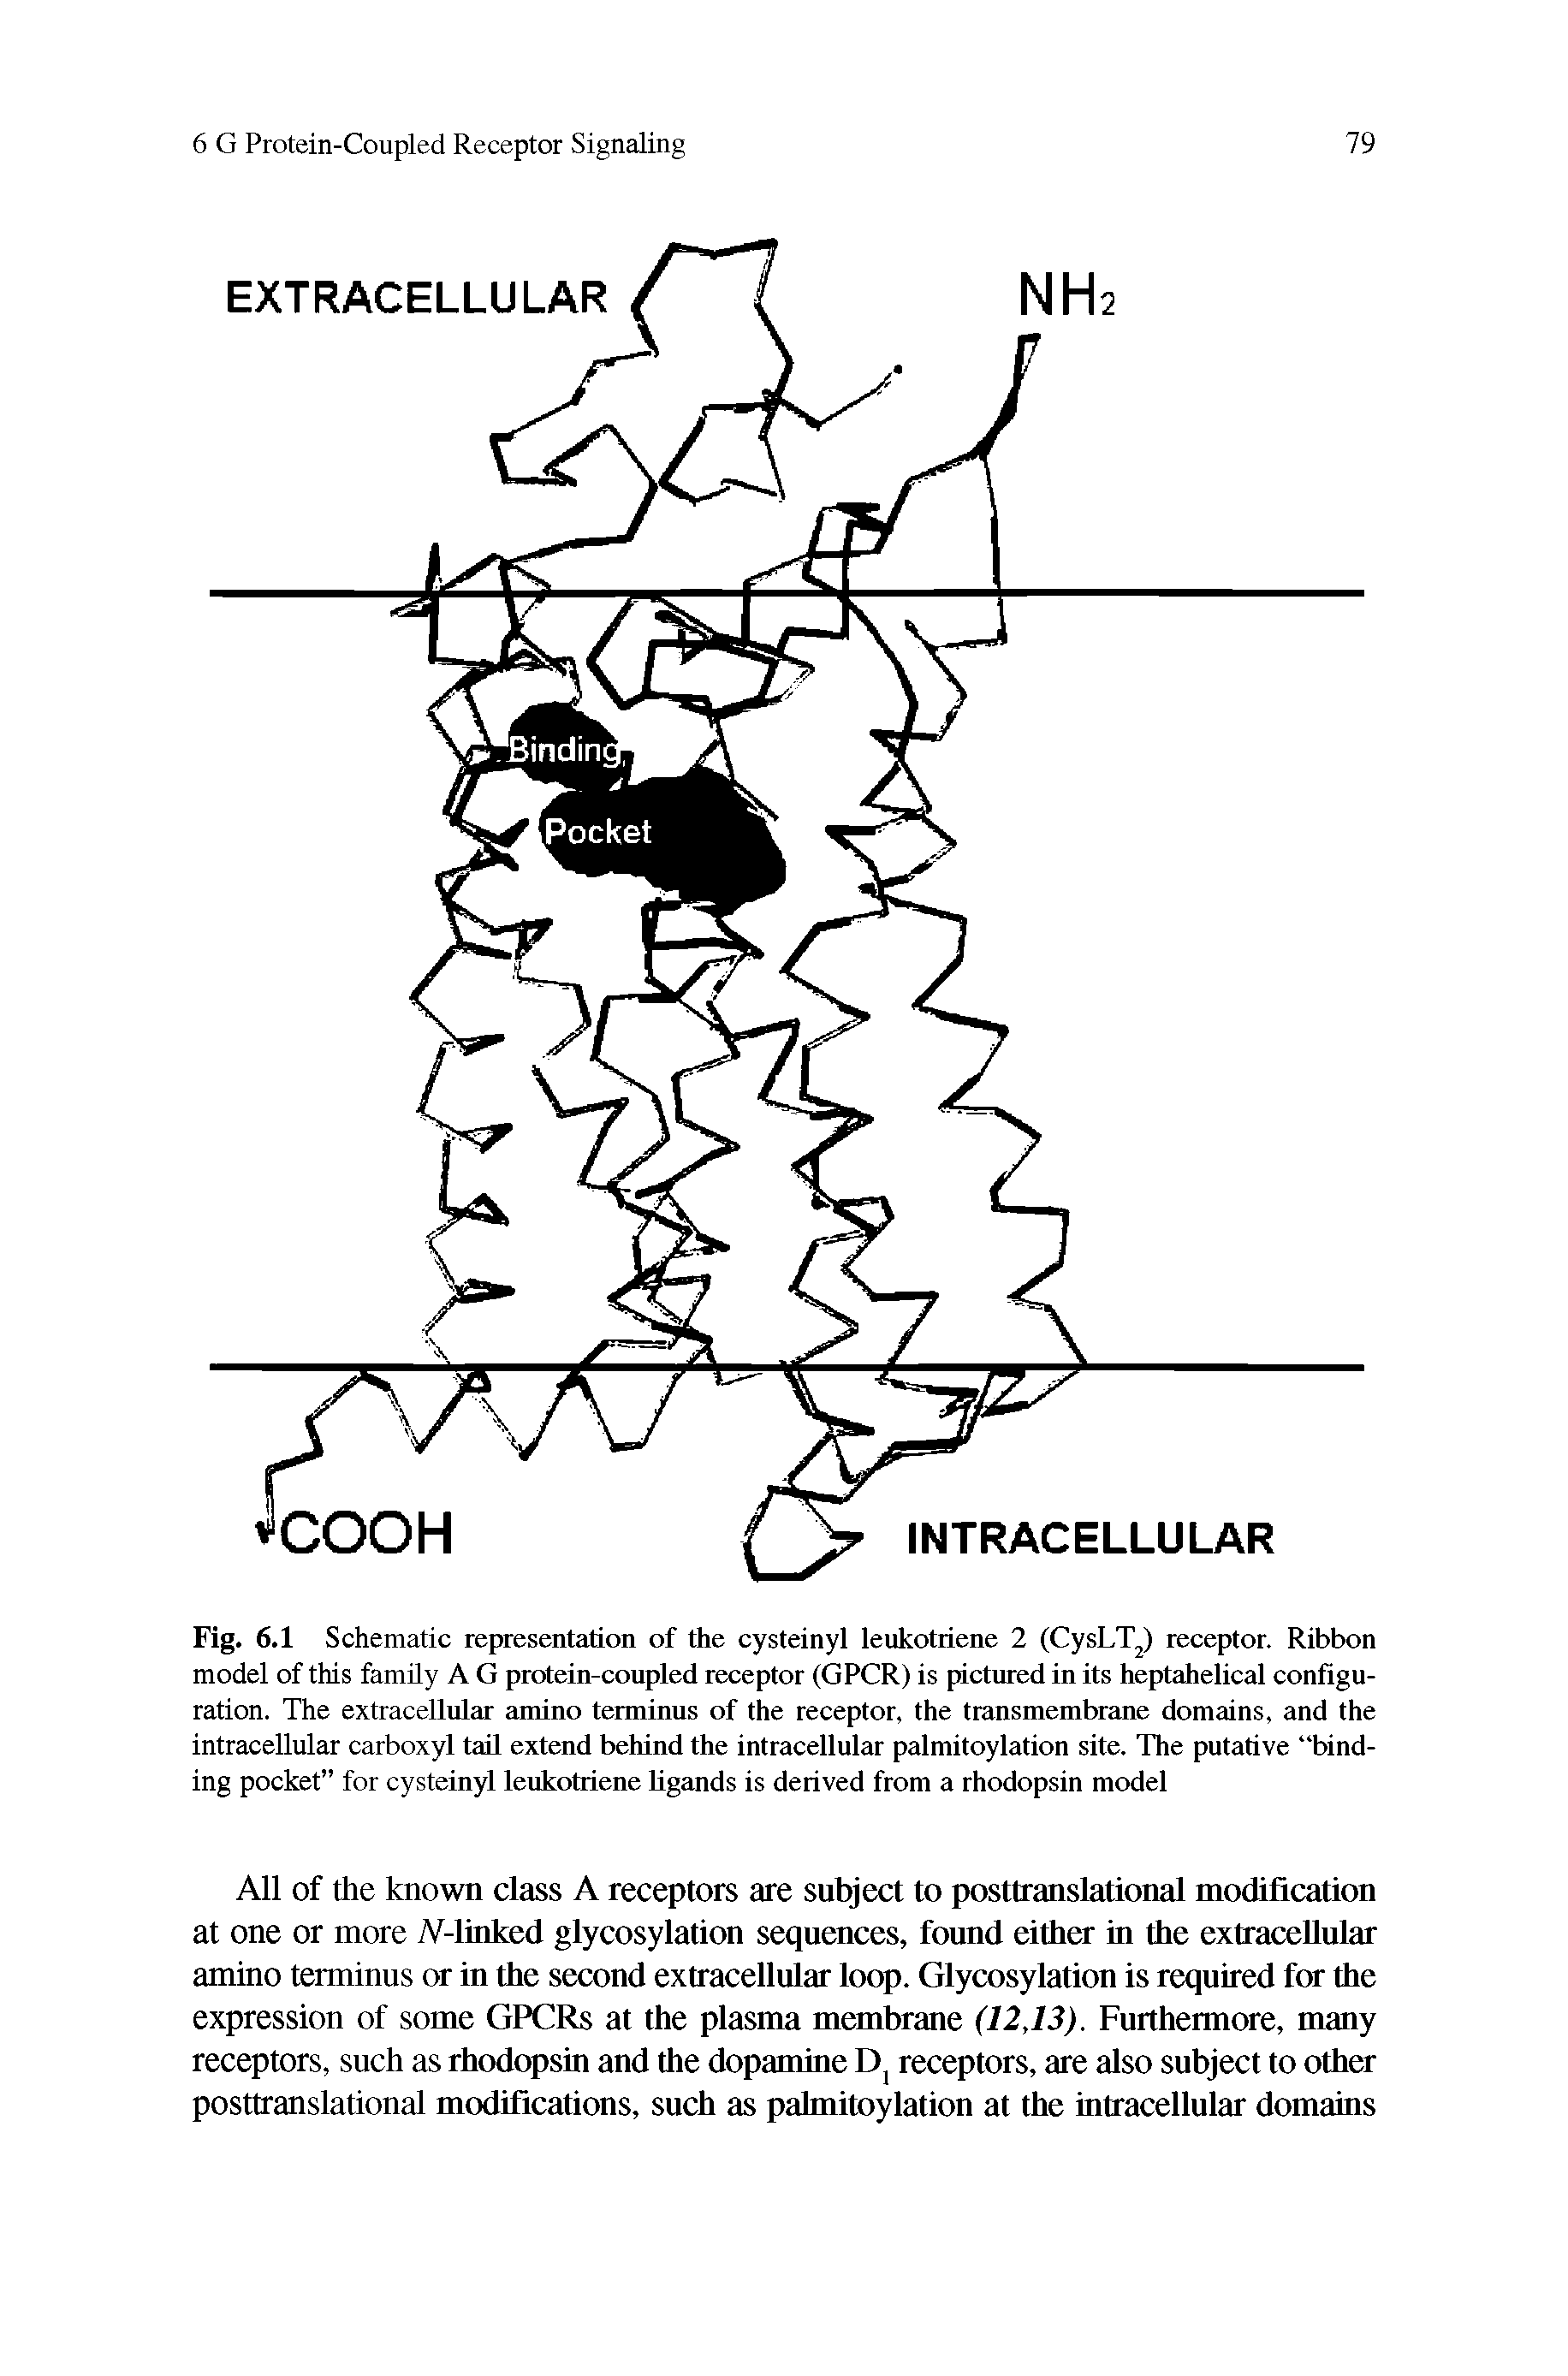 Fig. 6.1 Schematic representation of the cysteinyl leukotriene 2 (CysLT ) receptor. Ribbon model of this family A G protein-coupled receptor (GPCR) is pictured in its heptahelical configuration. The extracellular amino terminus of the receptor, the transmembrane domains, and the intracellular carboxyl tail extend behind the intracellular palmitoylation site. The putative binding pocket for cysteinyl leukotriene ligands is derived from a rhodopsin model...